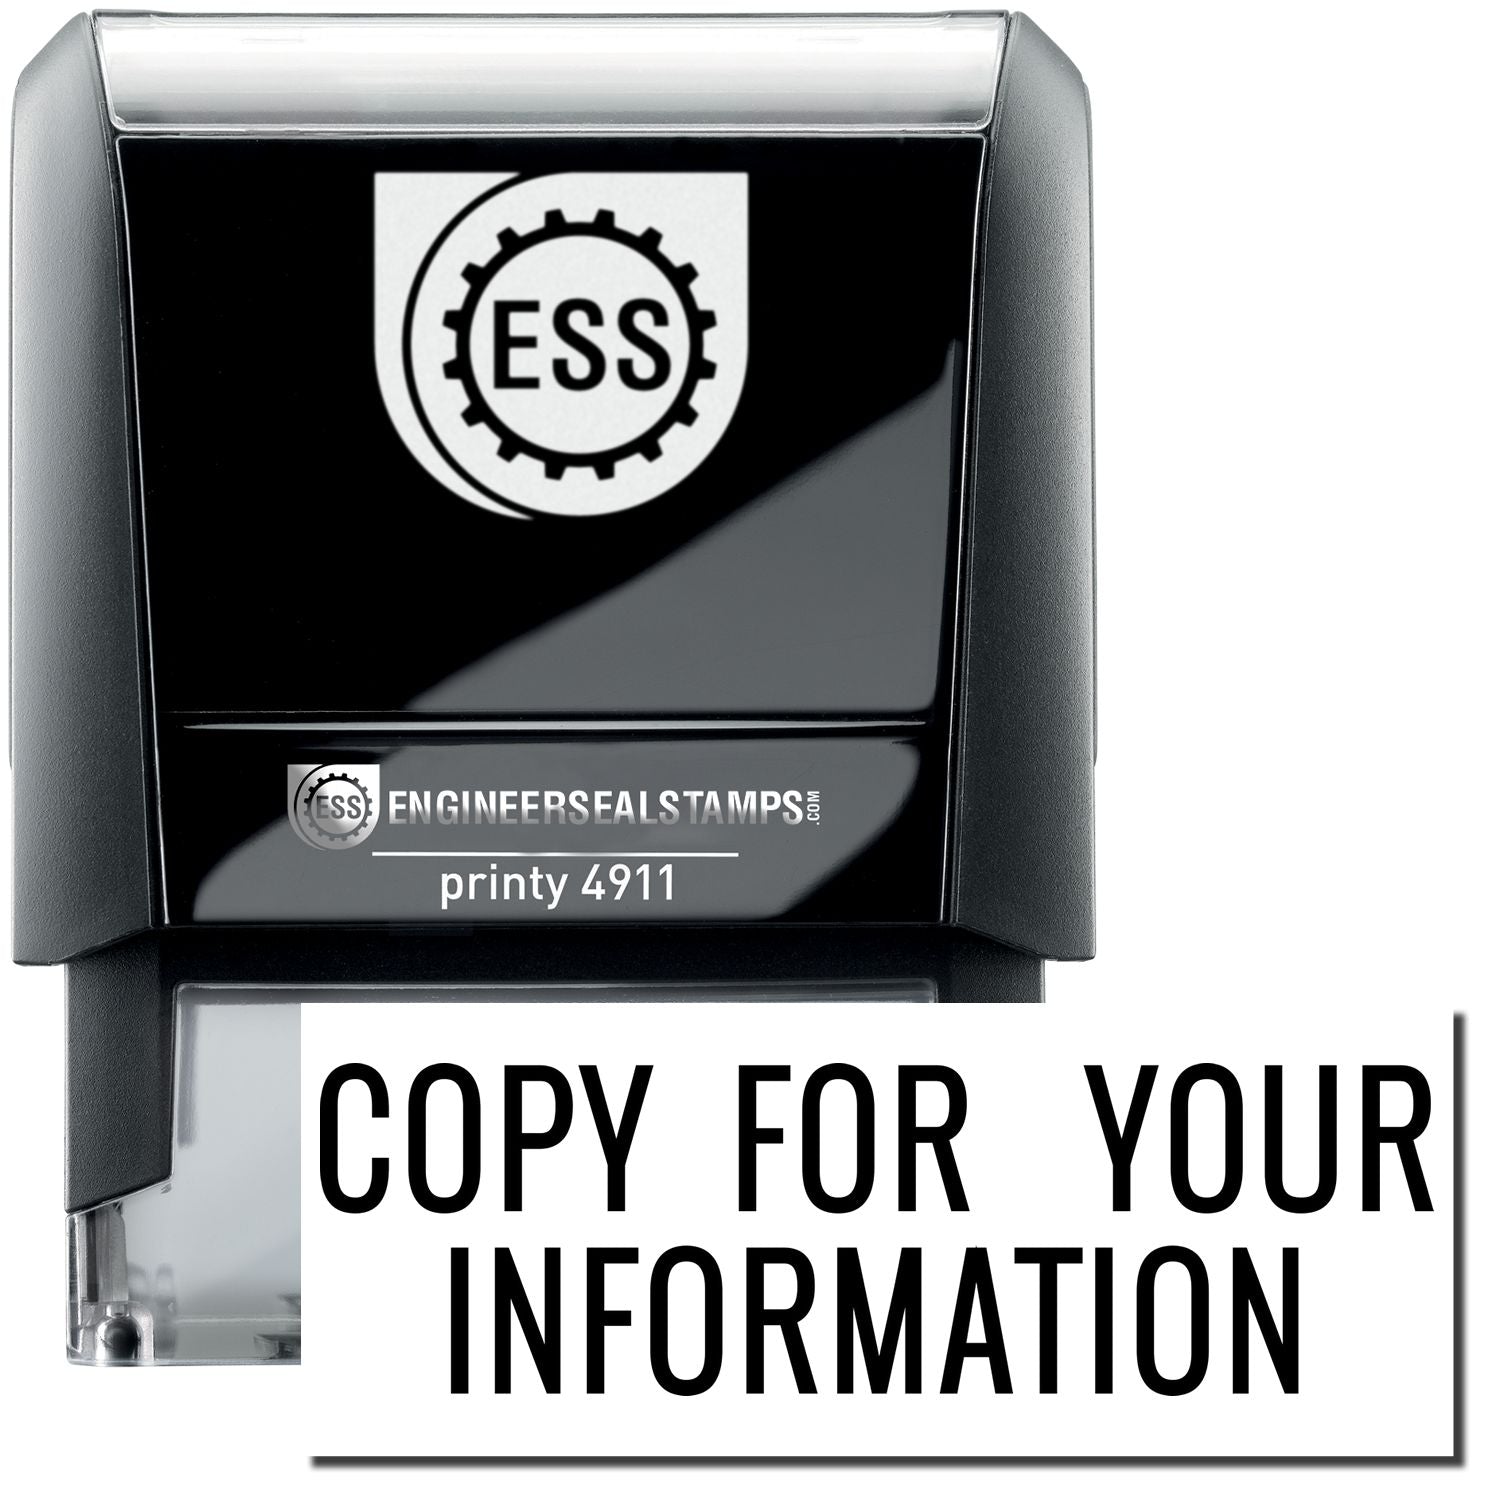 A self-inking stamp with a stamped image showing how the text "COPY FOR YOUR INFORMATION" in a narrow font is displayed after stamping.